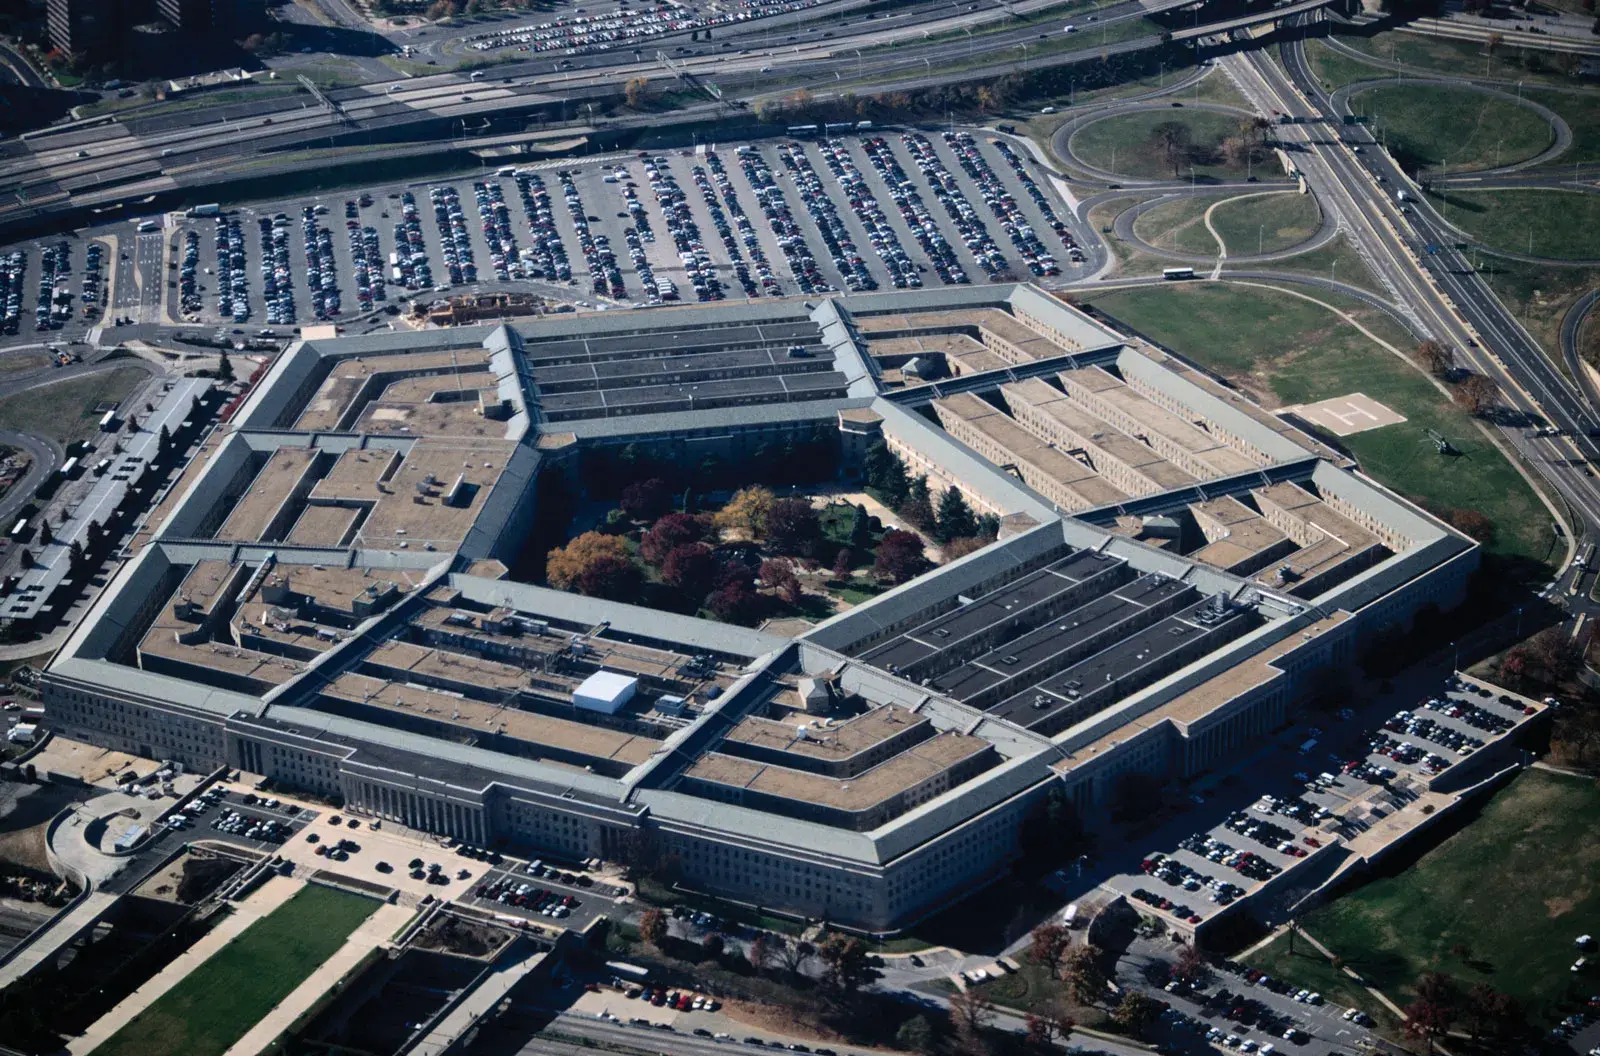 The Pentagon, symbolizing the epicenter of U.S. military power and strategic decision-making.